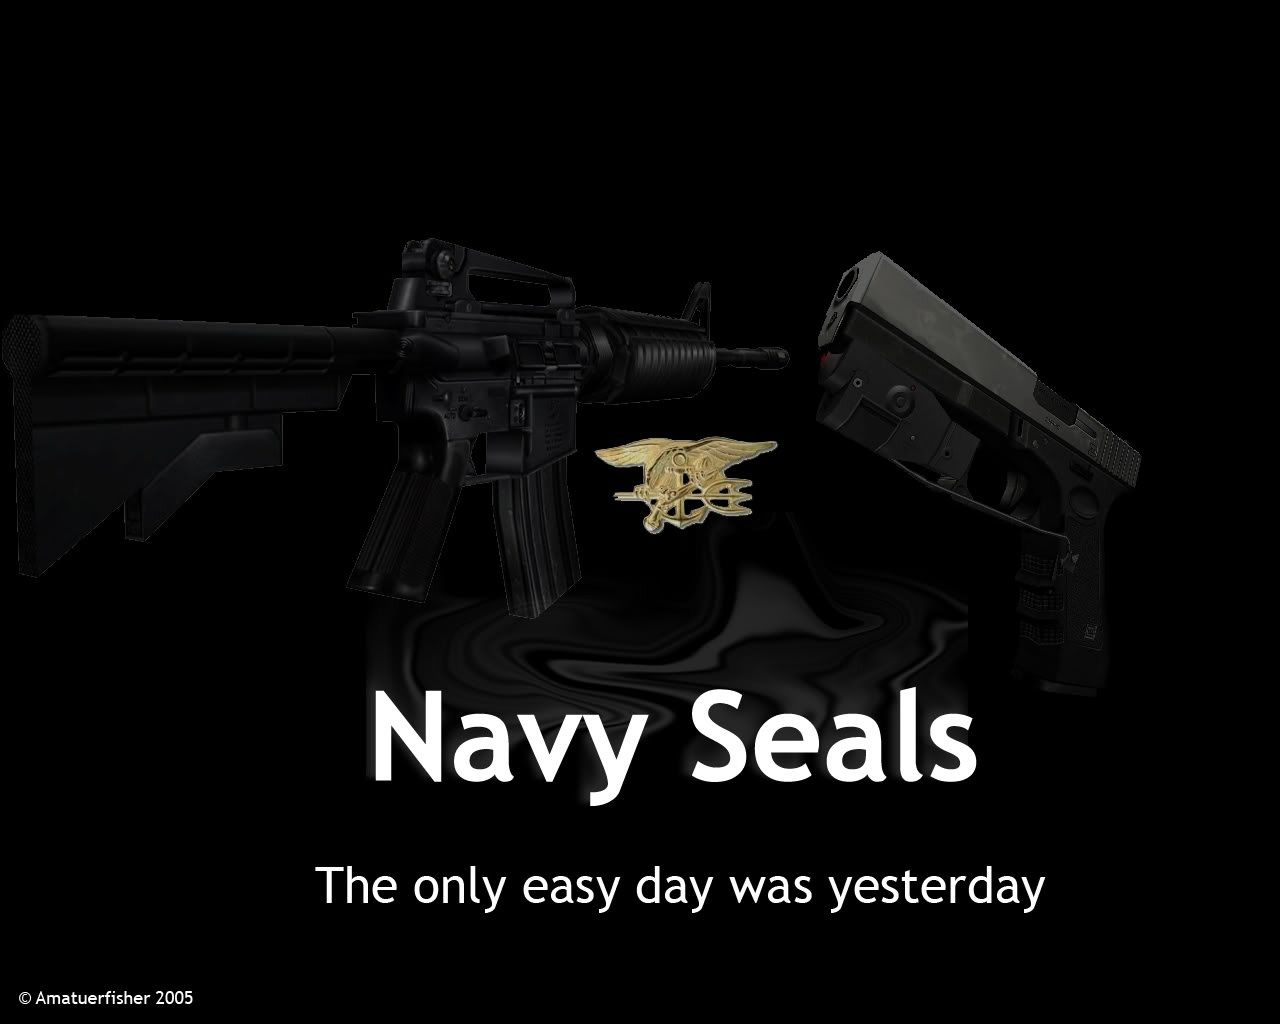 Navy Seal Wallpaper HDq Image Collection For Desktop